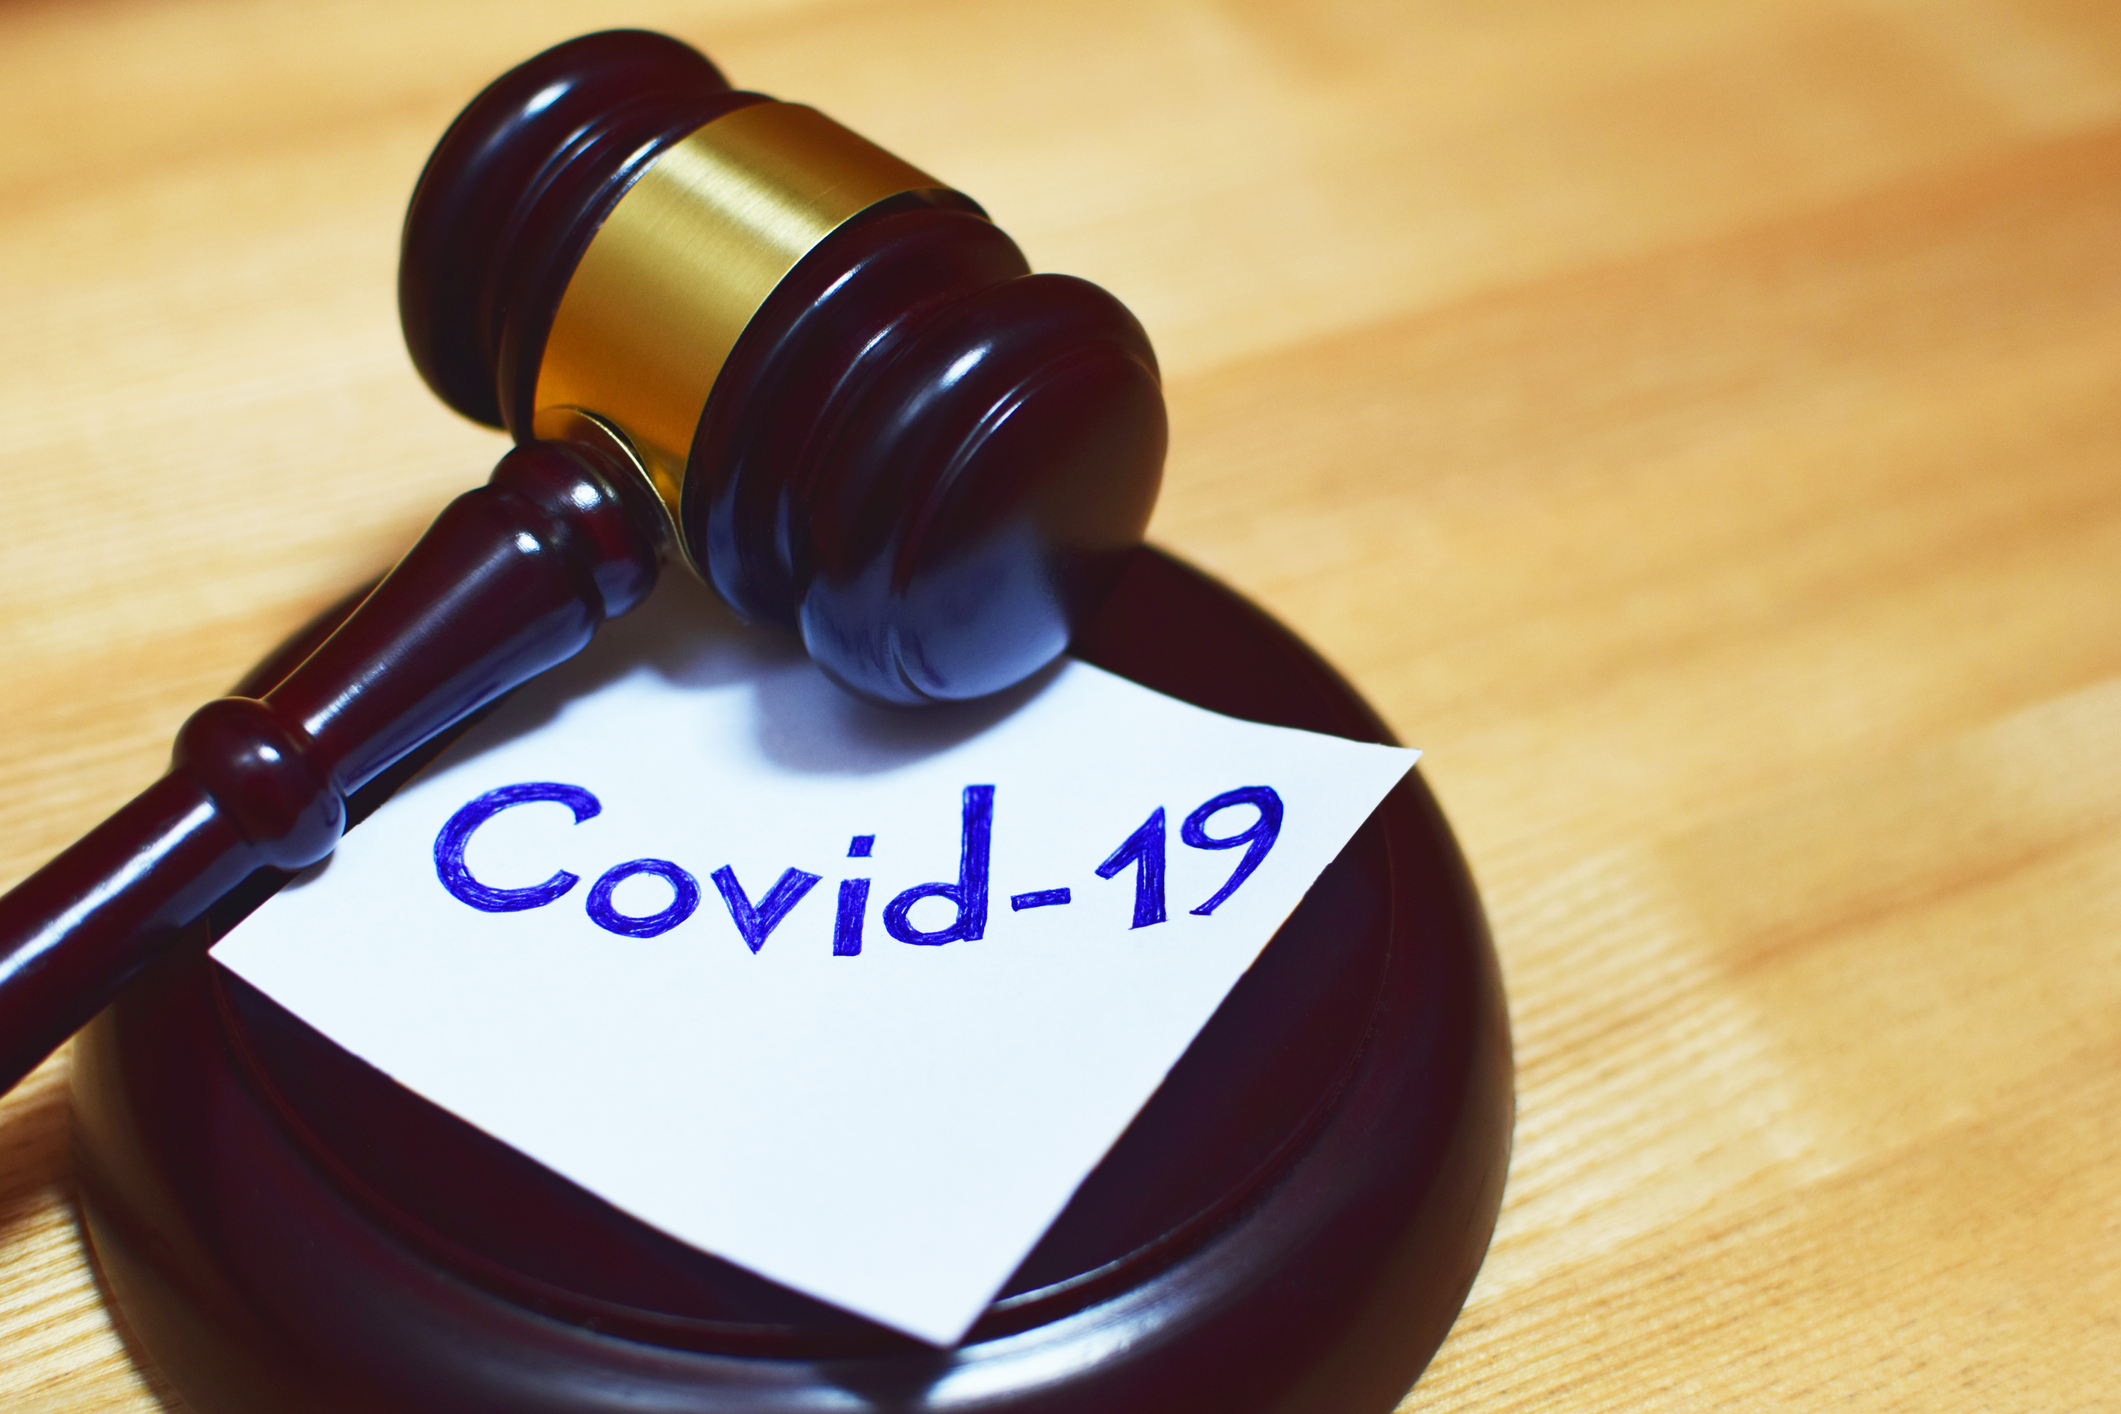 Gavel with COVID-19 note